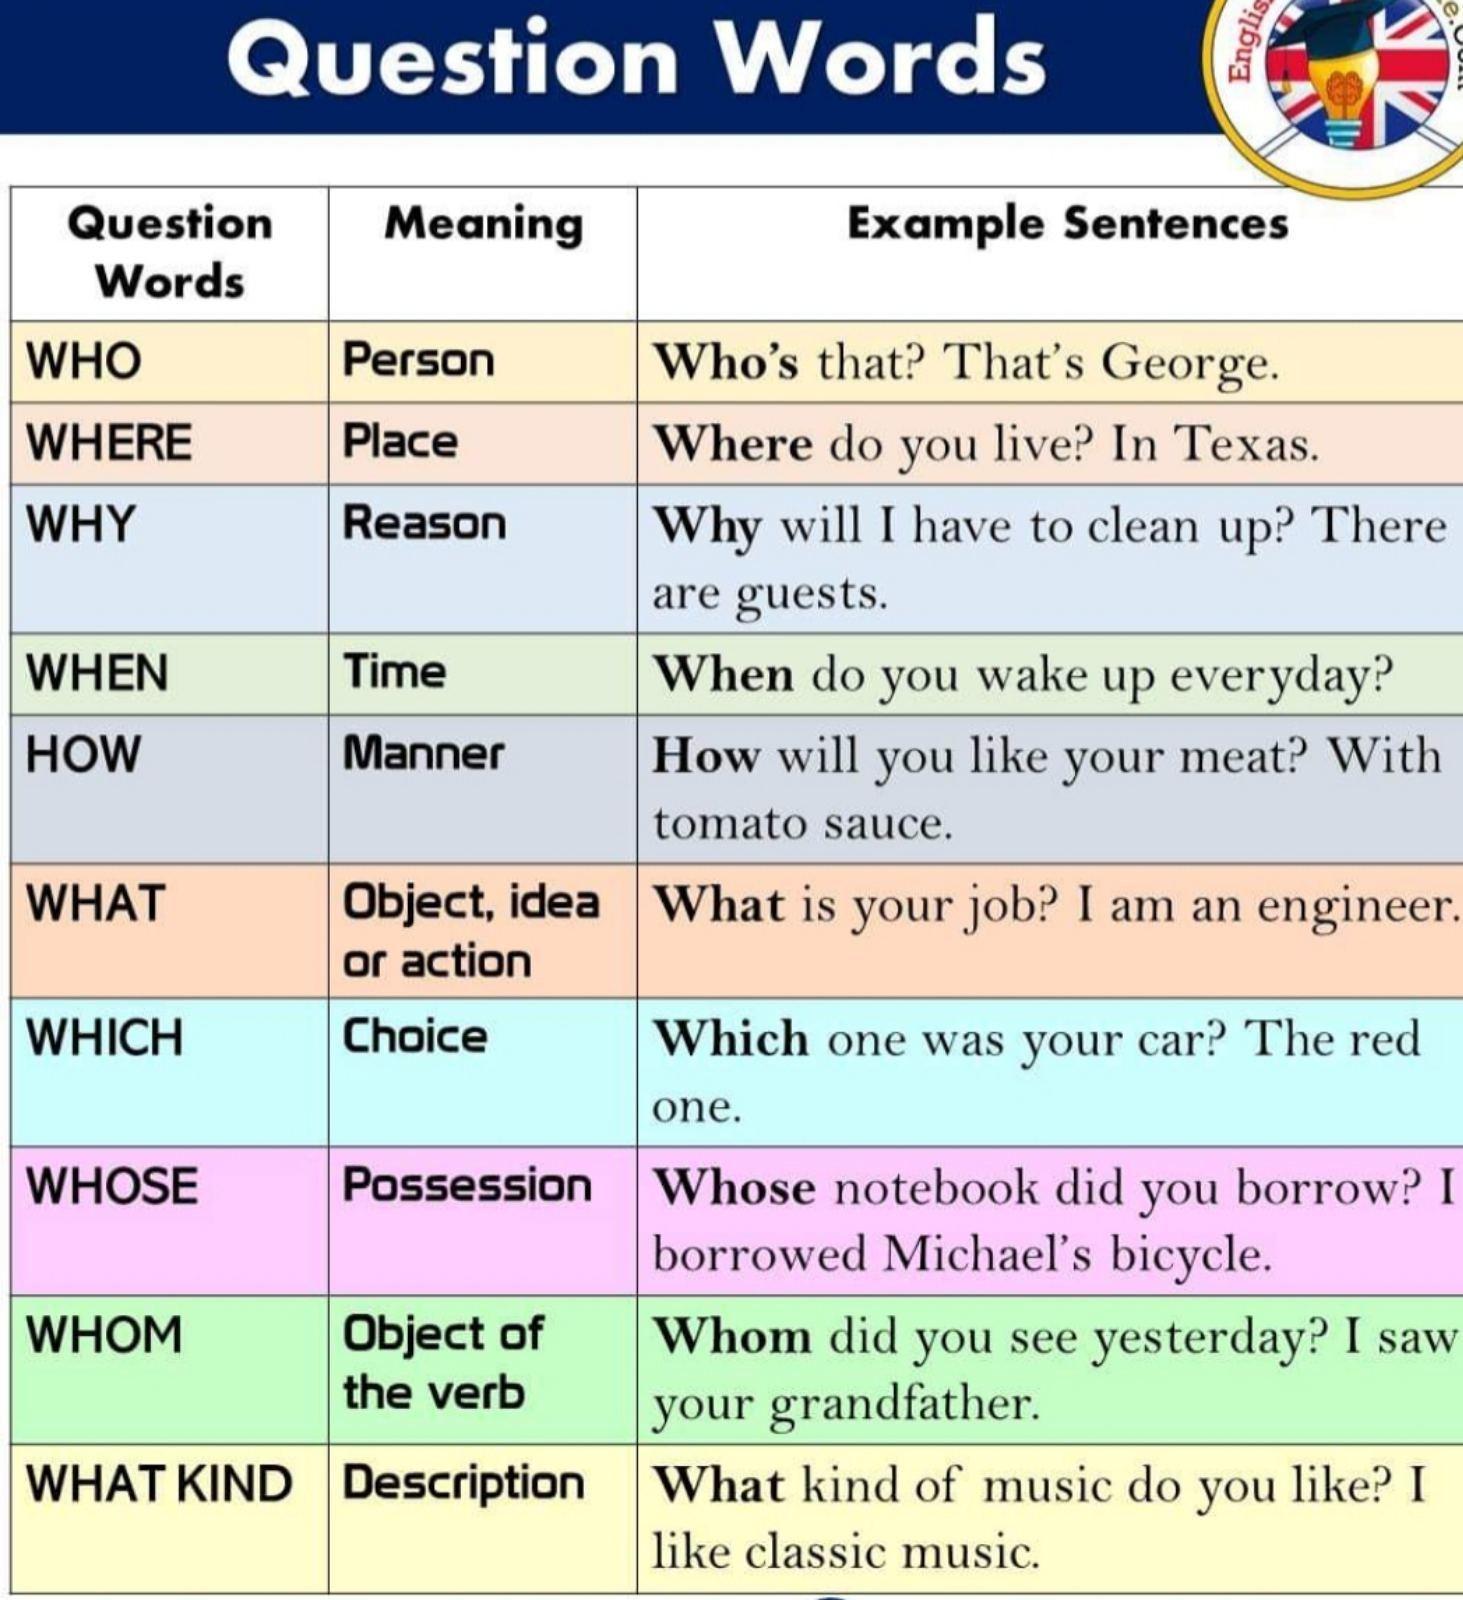 Match the sentences to their meanings. Вопросы с who в английском языке. Вопросы с what. Вопросы с who what в английском языке. Вопросы со словом who в английском языке.